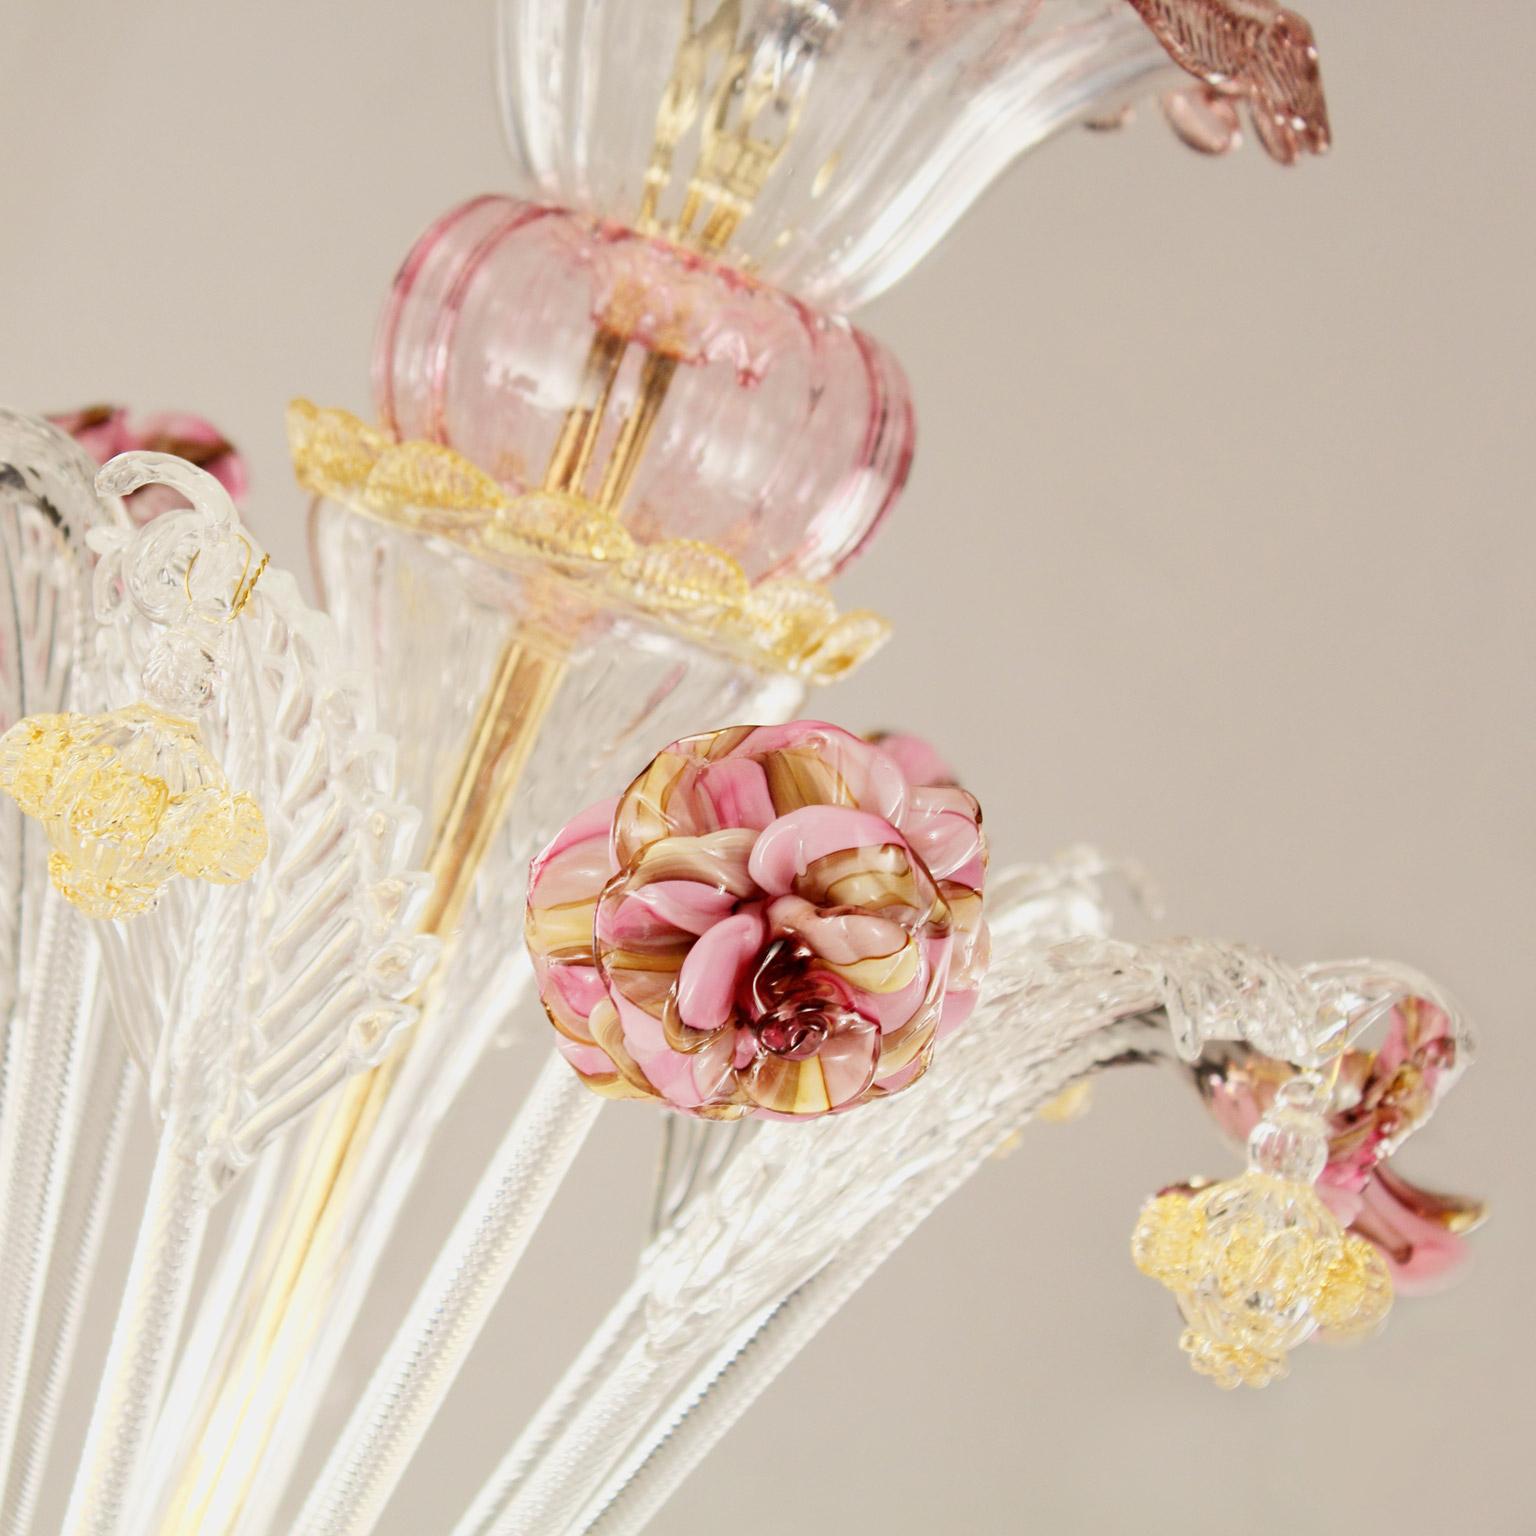 Toffee chandelier, 12-light, crystal Murano glass, polychrome details by Multiforme
The artistic glass chandelier Toffee is an elegant and delicate lighting work, colored with pastel tones. The structure is a combination of well proportioned volumes